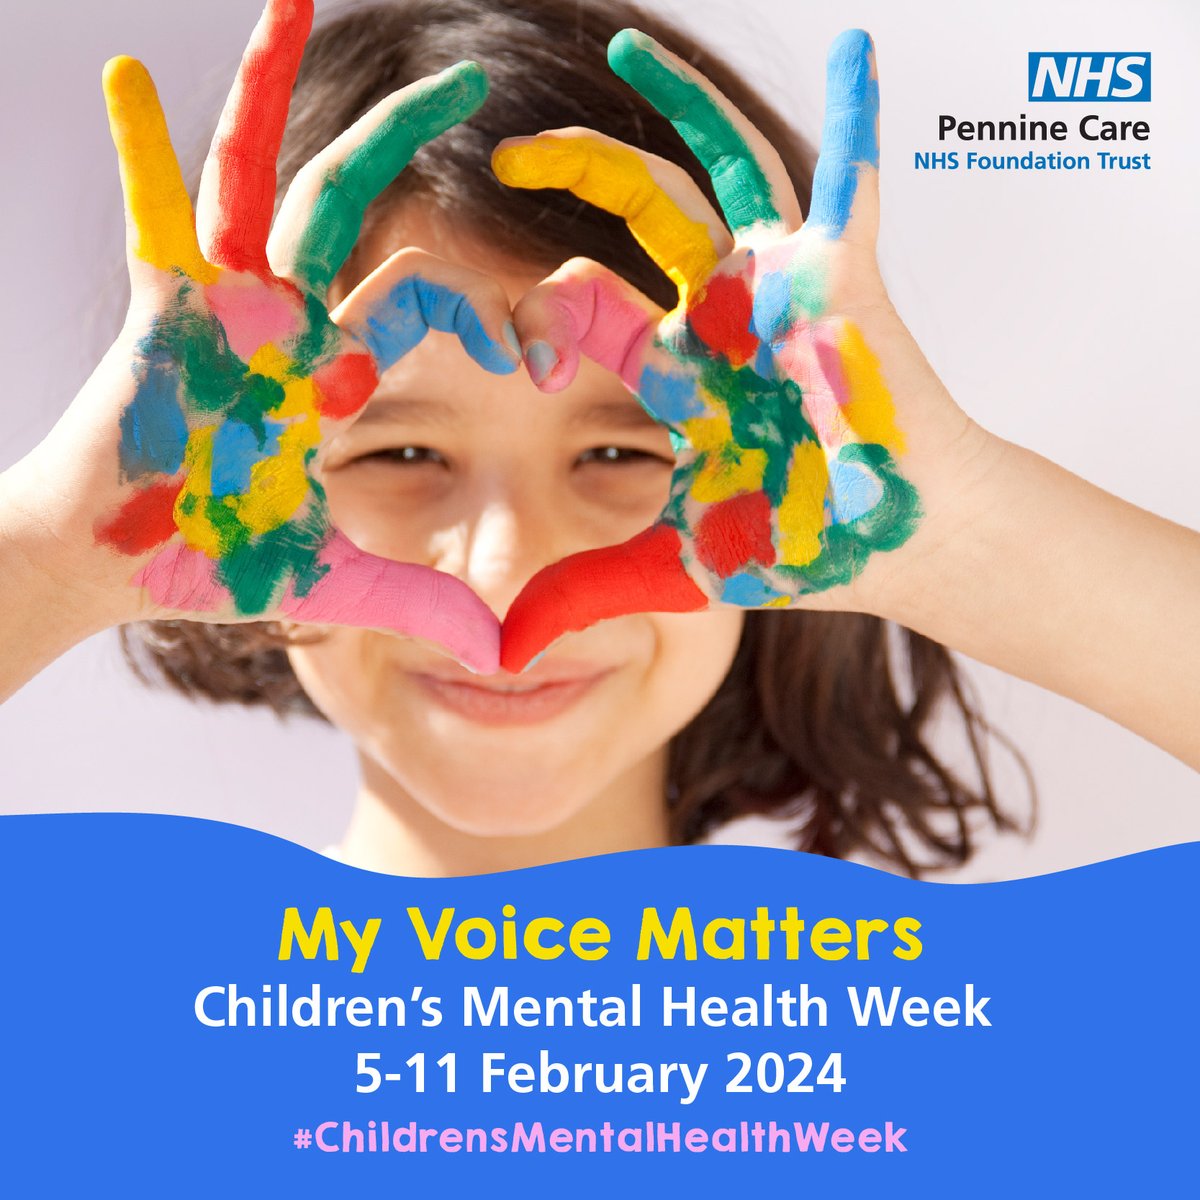 This #ChildrensMentalHealthWeek is an opportunity to raise some more awareness and keep fighting the stigma around mental health. The theme is ‘My Voice Matters’ – and it’s important we share the message with our children that speaking up about mental health is a positive thing!